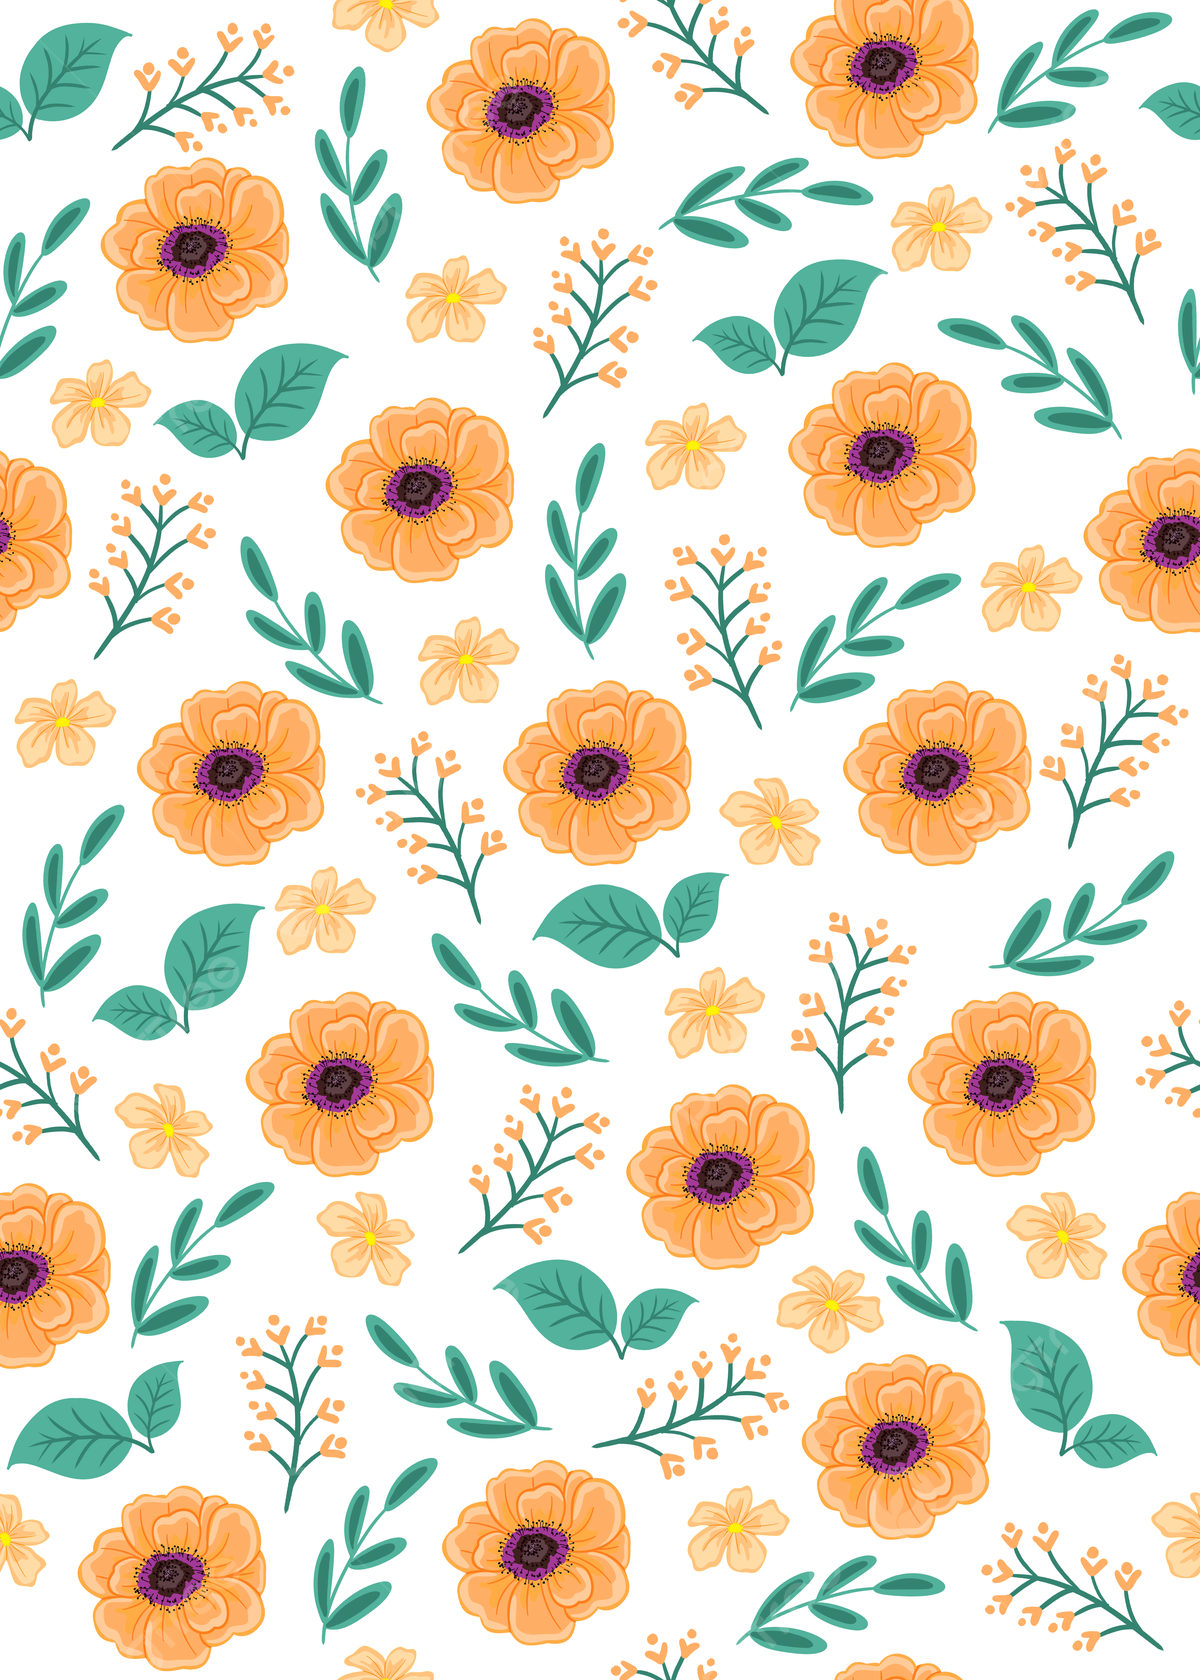 Summer Cute Orange Small Flower Gap Background Wallpaper Image For Free Download